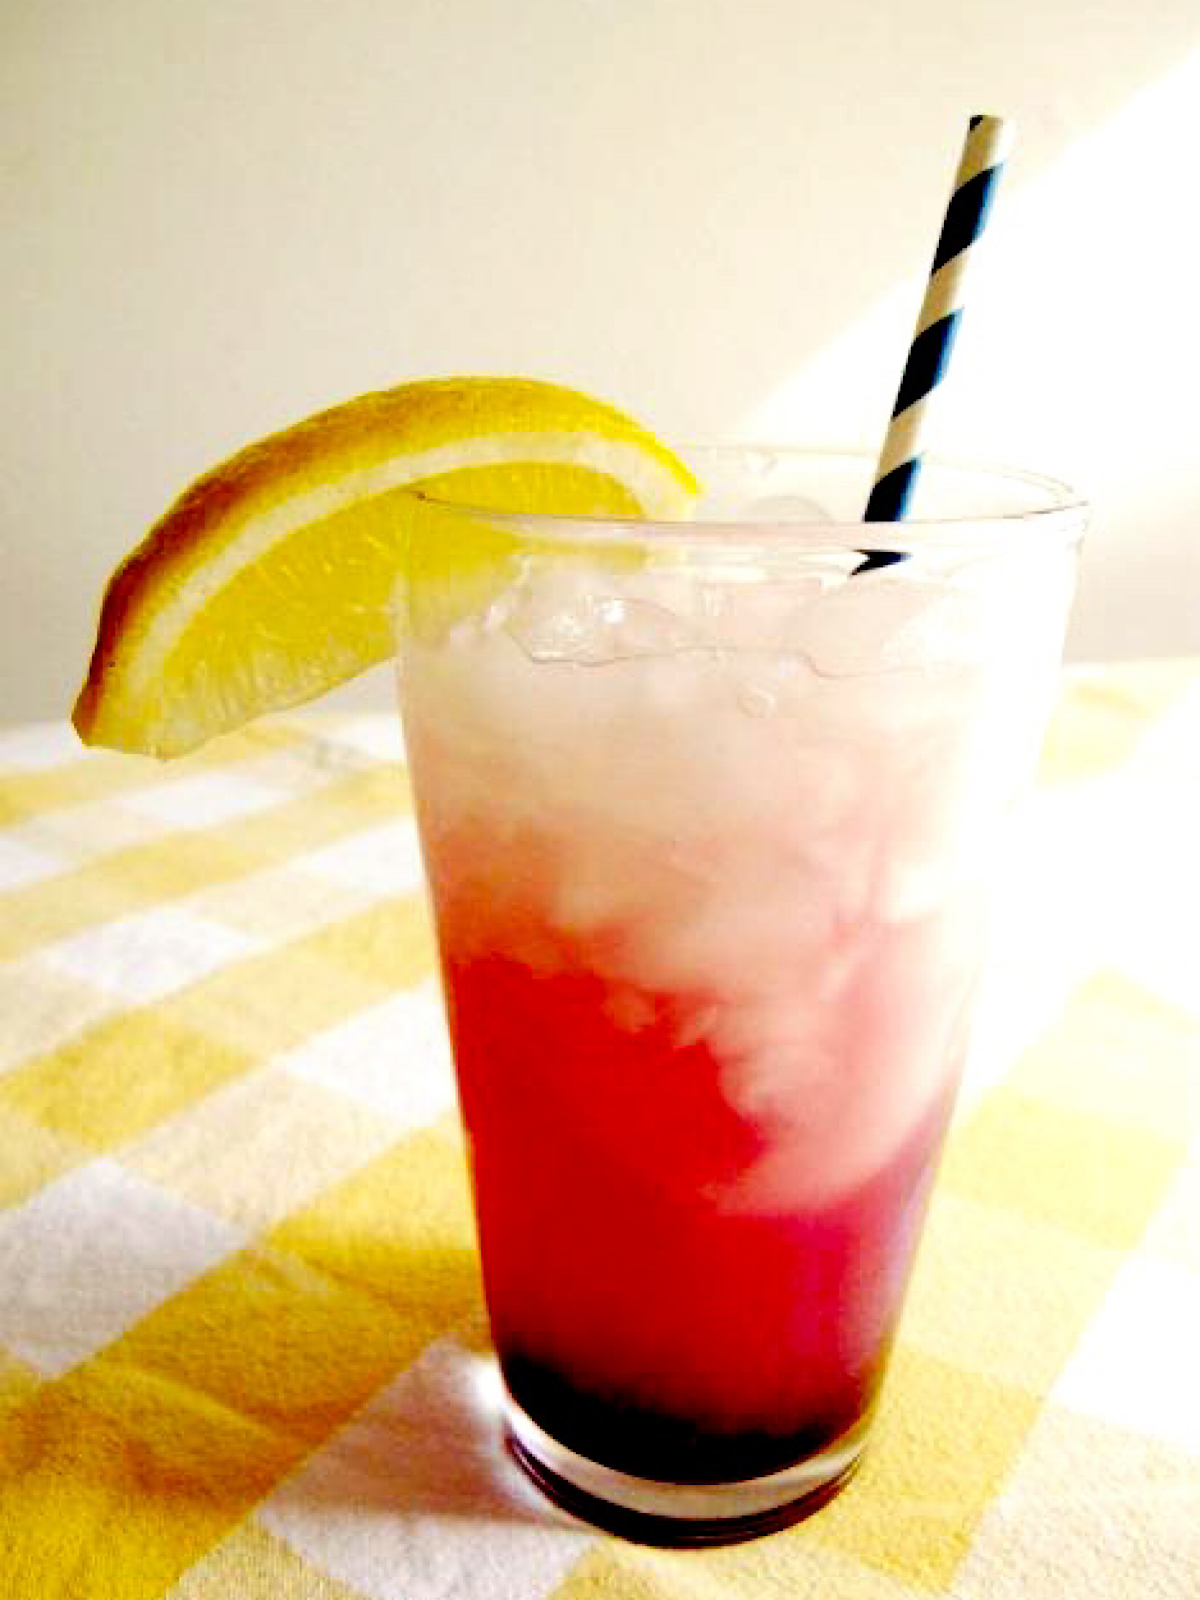 Glass of lemonade with blueberry syrup garnished with wedge of lemon and a striped straw.